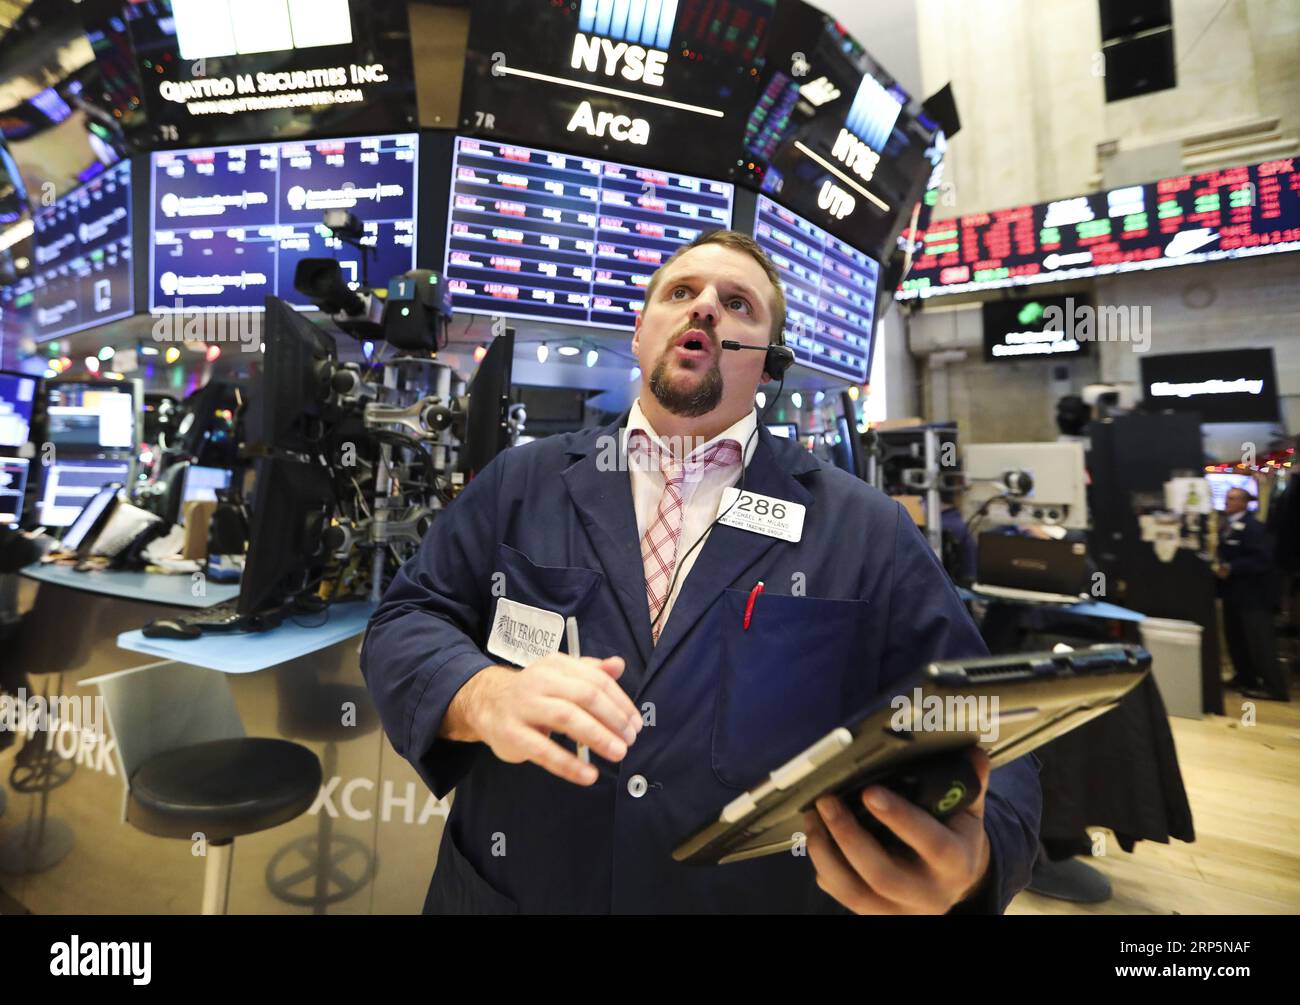 (181219) -- NEW YORK, Dec. 19, 2018 -- A trader works at the New York Stock Exchange in New York, the United States, on Dec. 19, 2018. U.S. stocks ended lower on Wednesday. The Dow fell 1.49 percent to 23,323.66, and the S&P 500 decreased 1.54 percent to 2,506.96, while the Nasdaq was down 2.17 percent to 6,636.83. ) U.S.-NEW YORK-STOCKS WangxYing PUBLICATIONxNOTxINxCHN Stock Photo